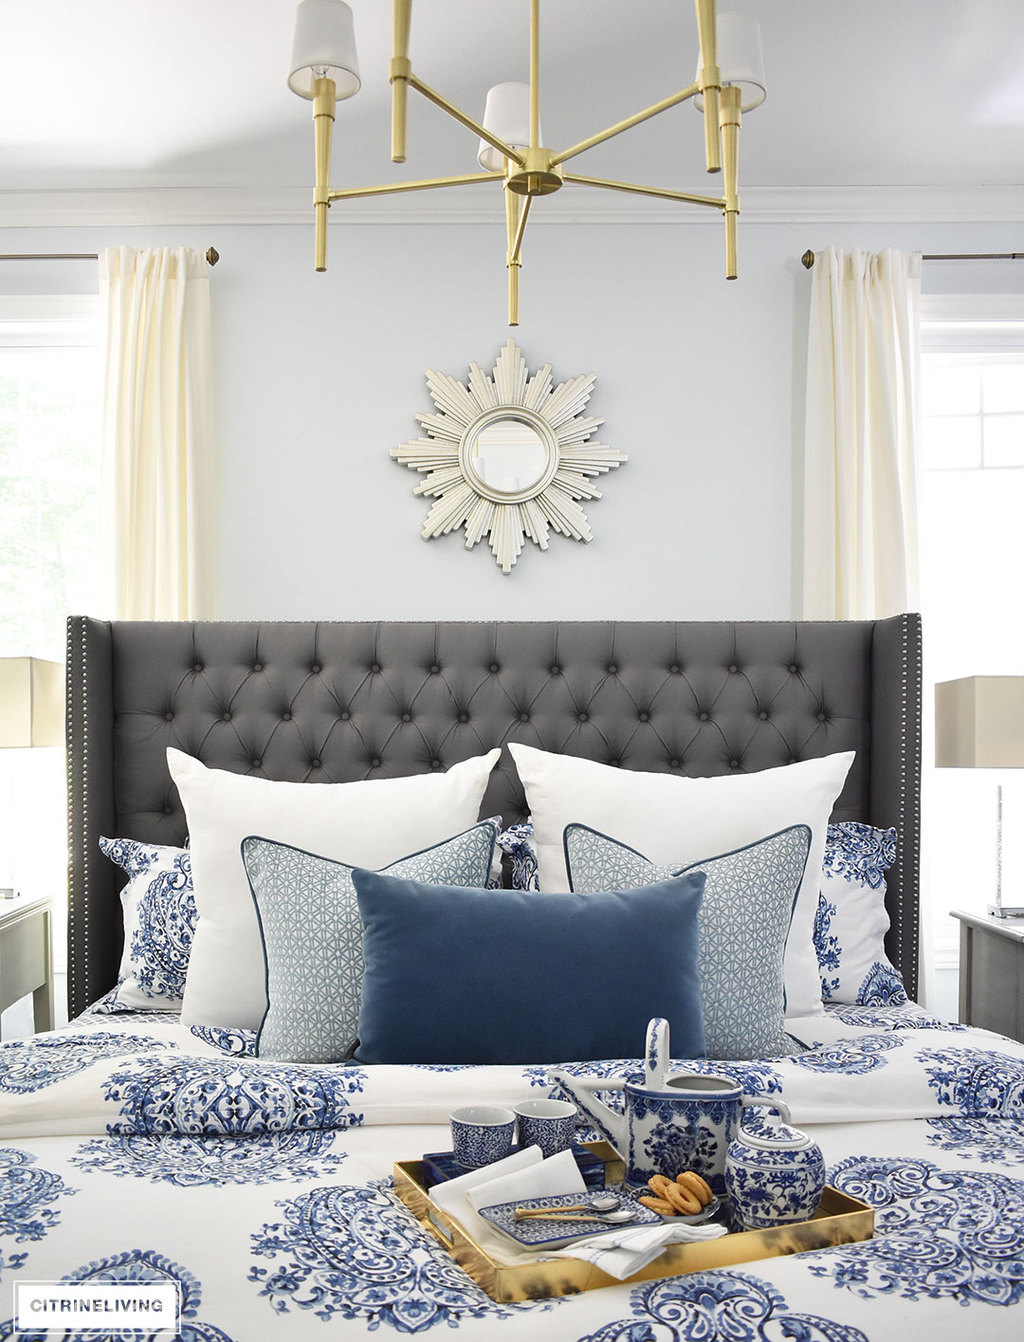 A sunburst mirror is a chic and classic addition to any space! This beautiful blue and white bedroom accented with a mix of cool and warm metals is elegant, warm and inviting. A metallic sunburst mirror as the perfect finishing touch.